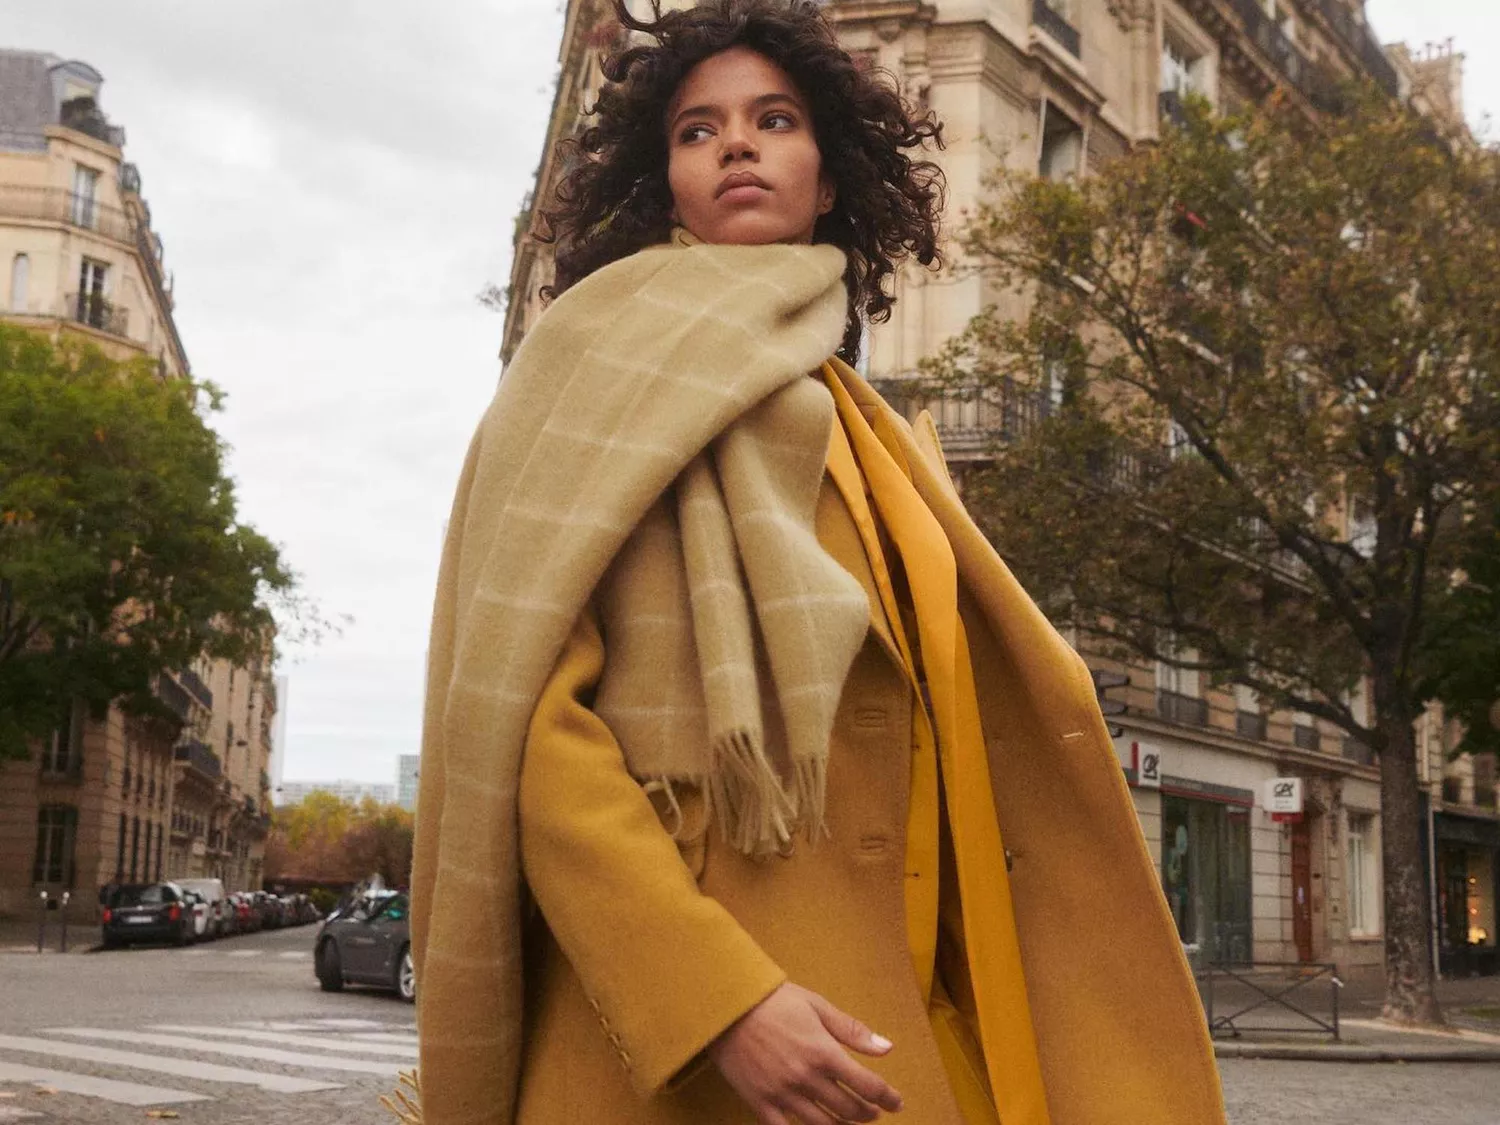 Woman with beige blanket scarf and yellow coat walking through Paris